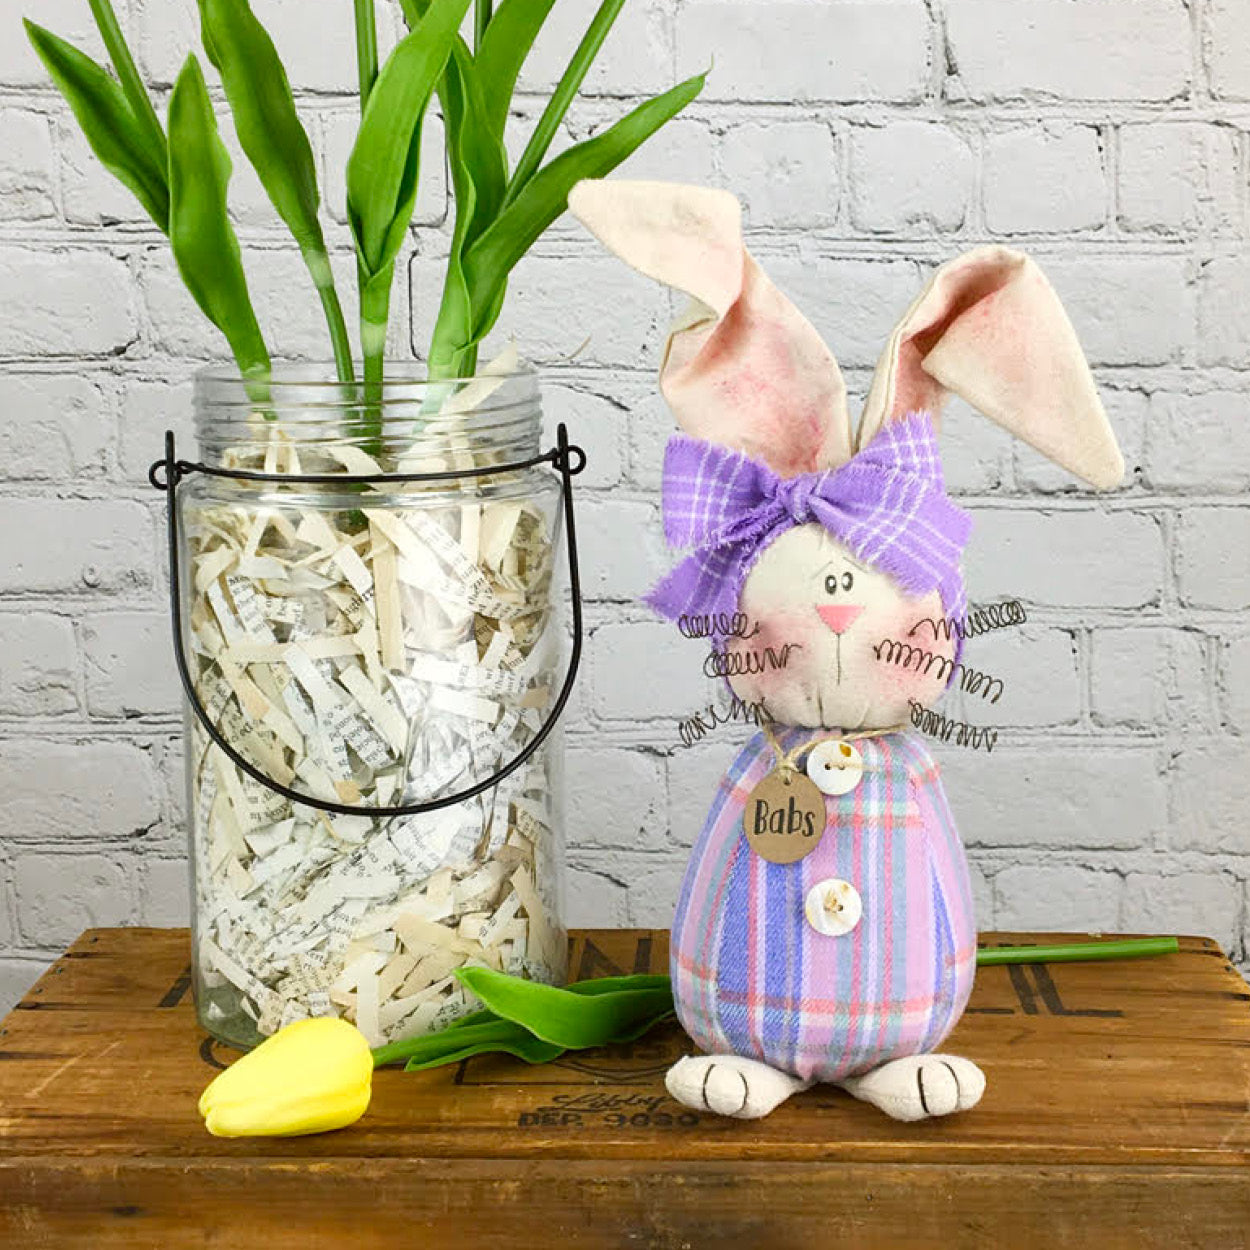 Honey and Me Babs the Bunny Plush, Easter Bunny Plush Vintage Style Grunge Rustic